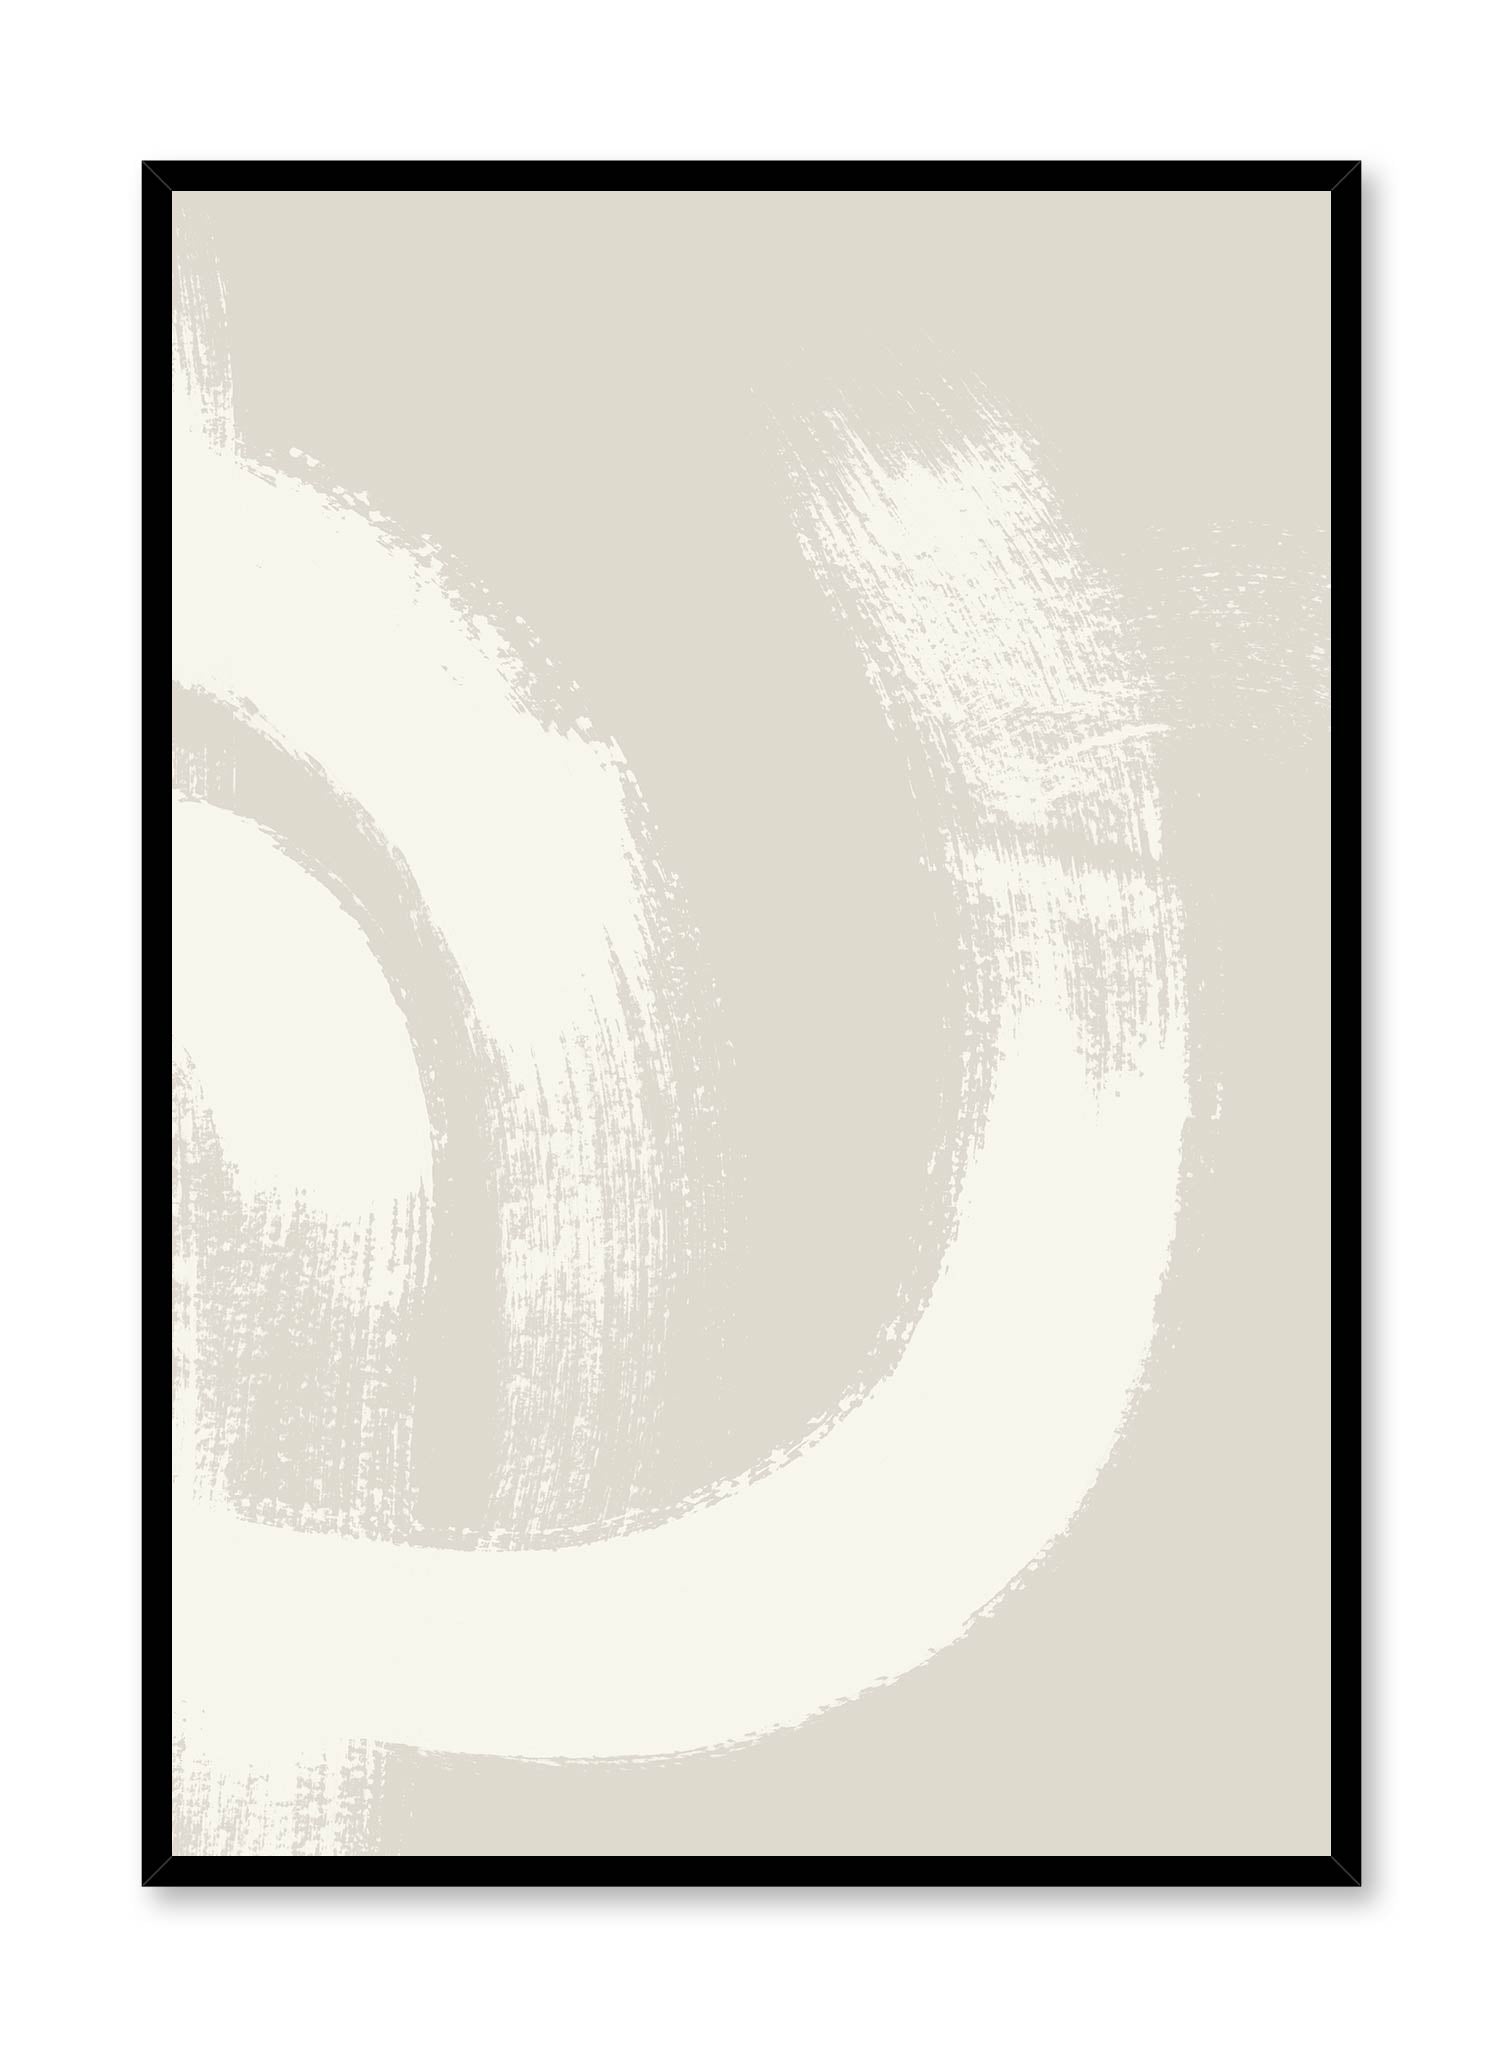 Muslin is a minimalist abstract illustration of circular brush strokes of white paint by Opposite Wall.